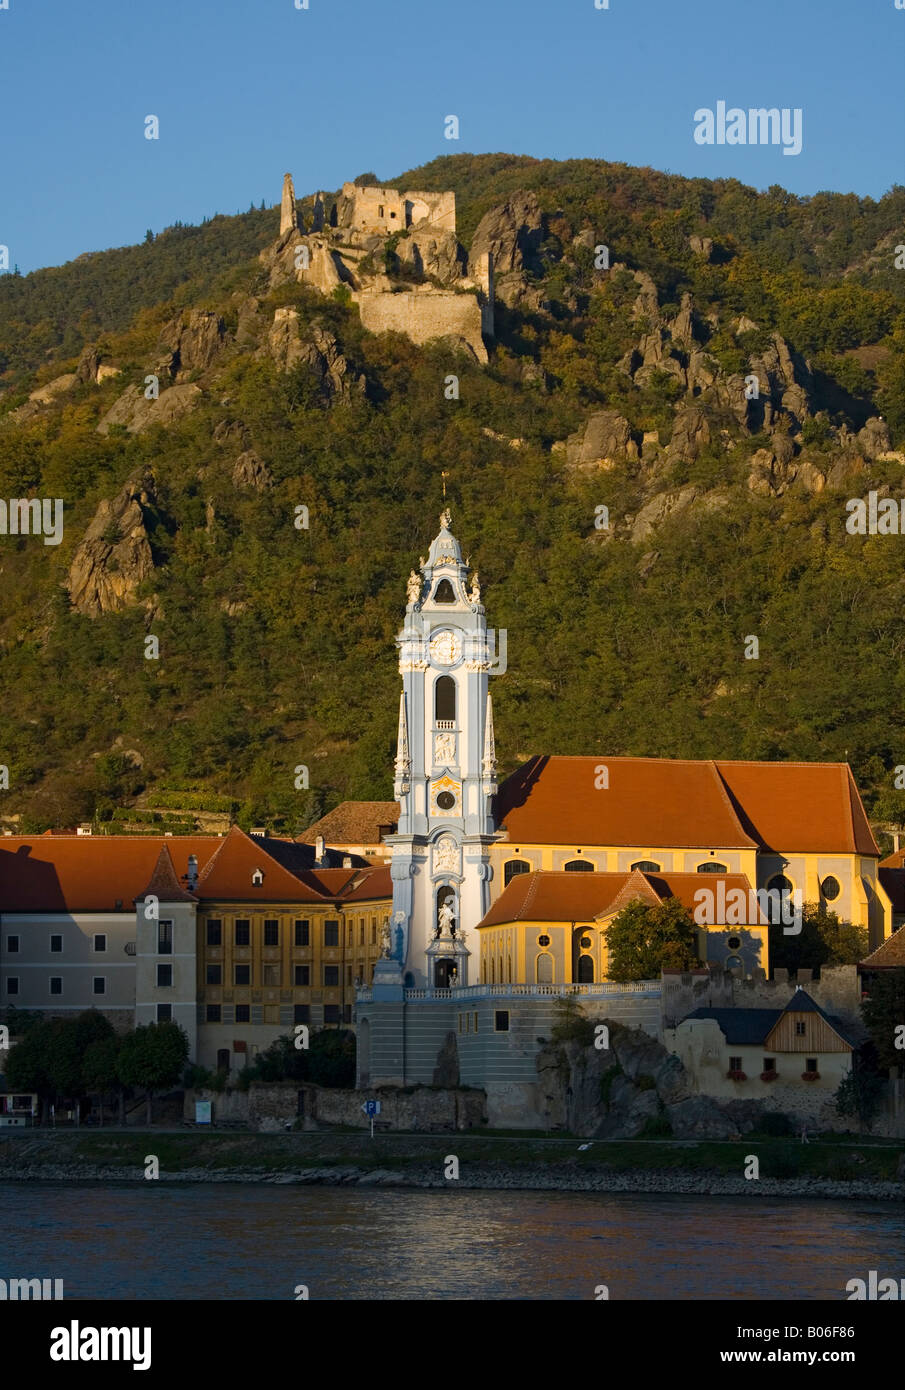 Durstein Blue Church and Castle on Danube River in Austria Stock Photo